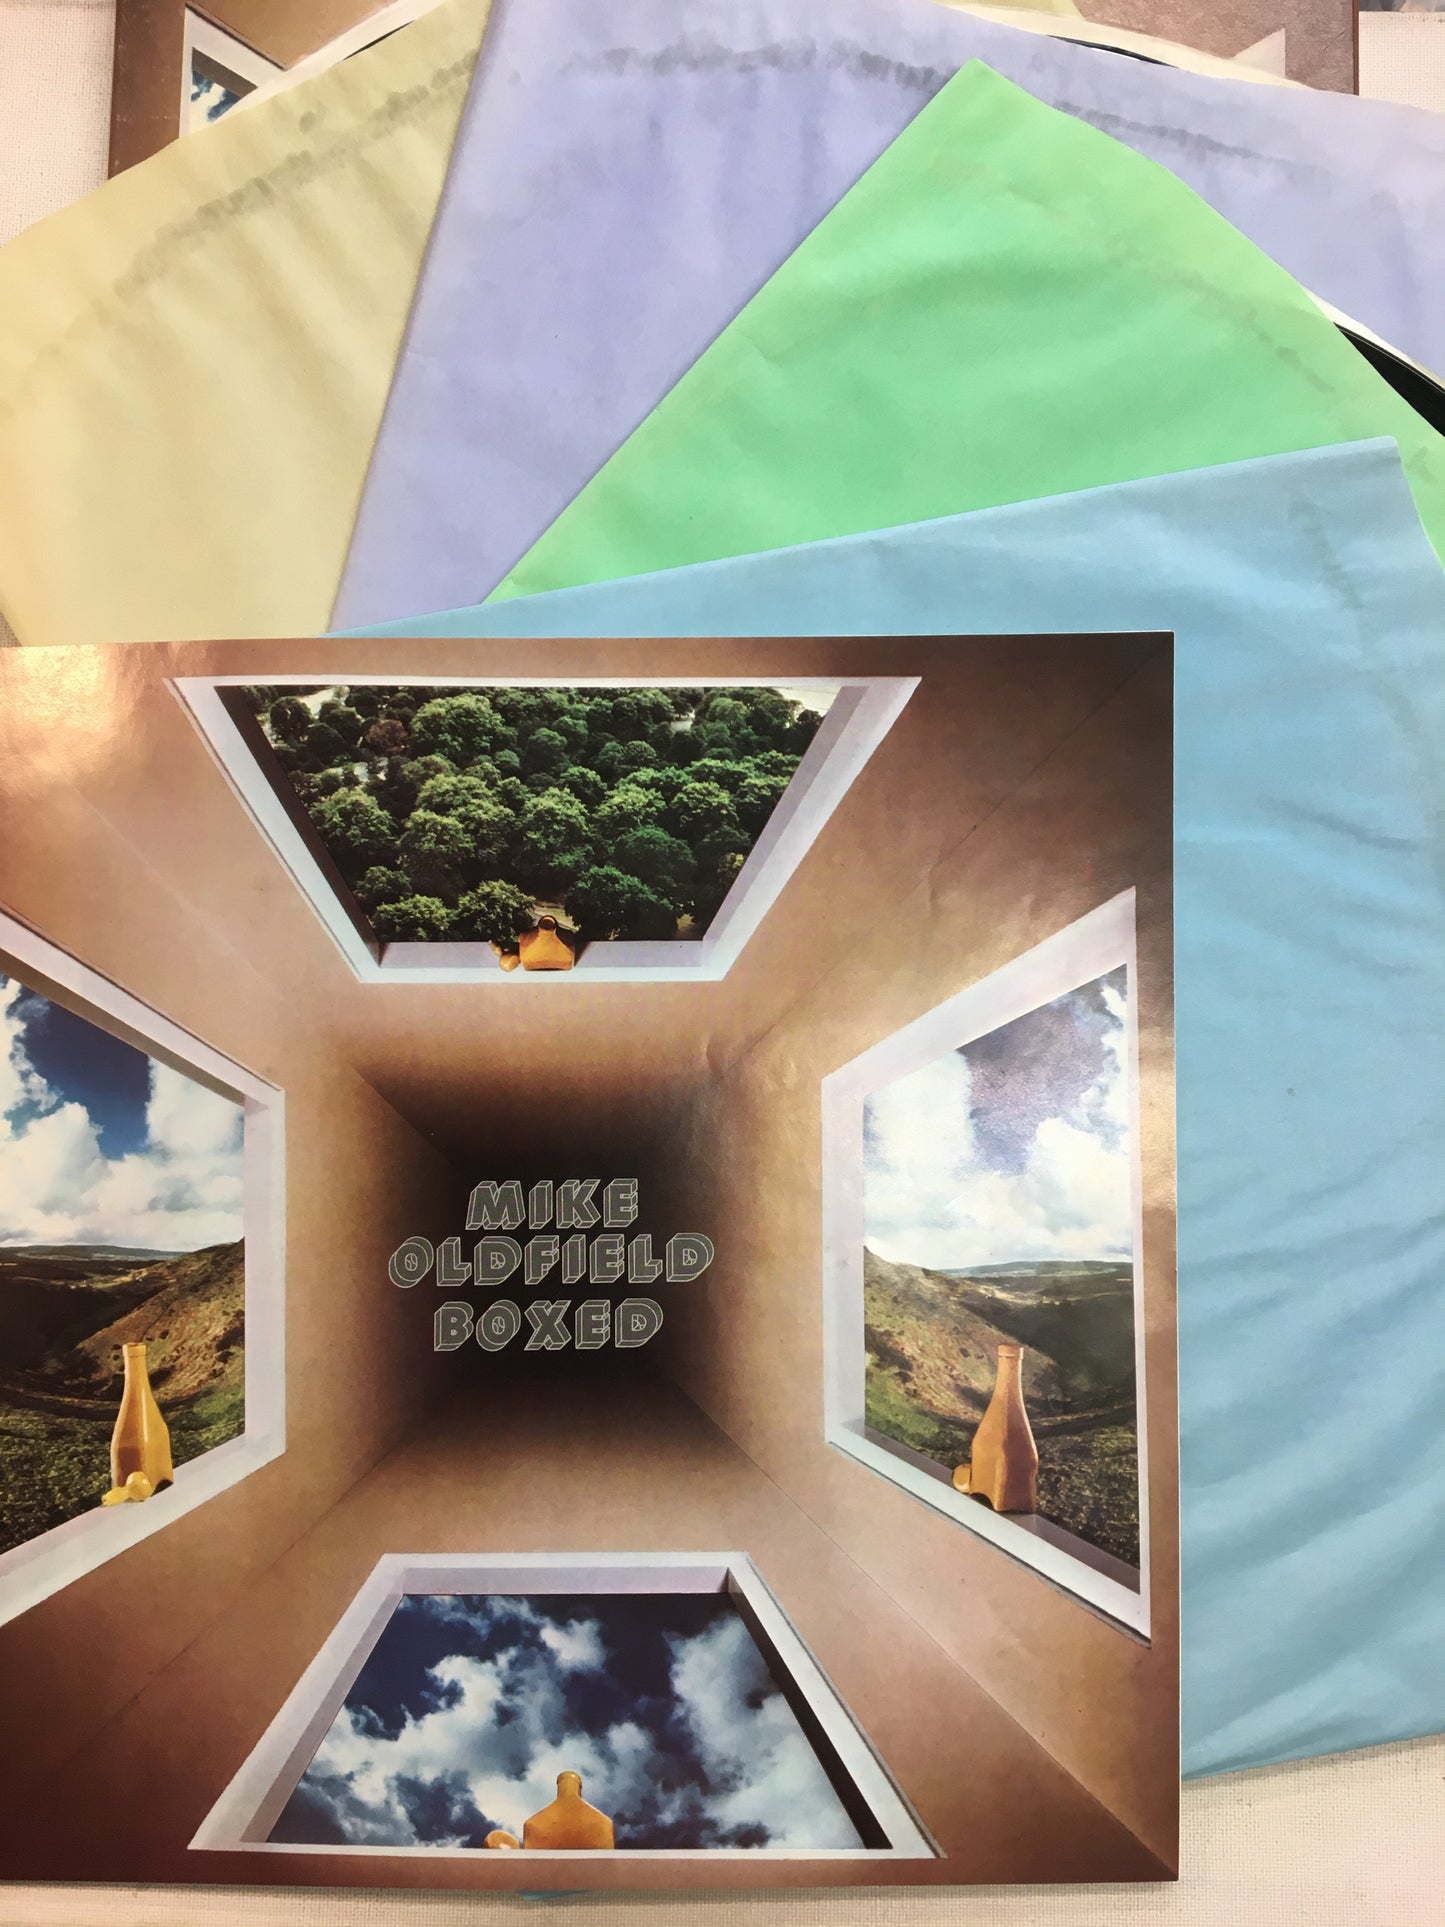 MIKE OLDFIELD 4 LP BOXSET ; BOXED